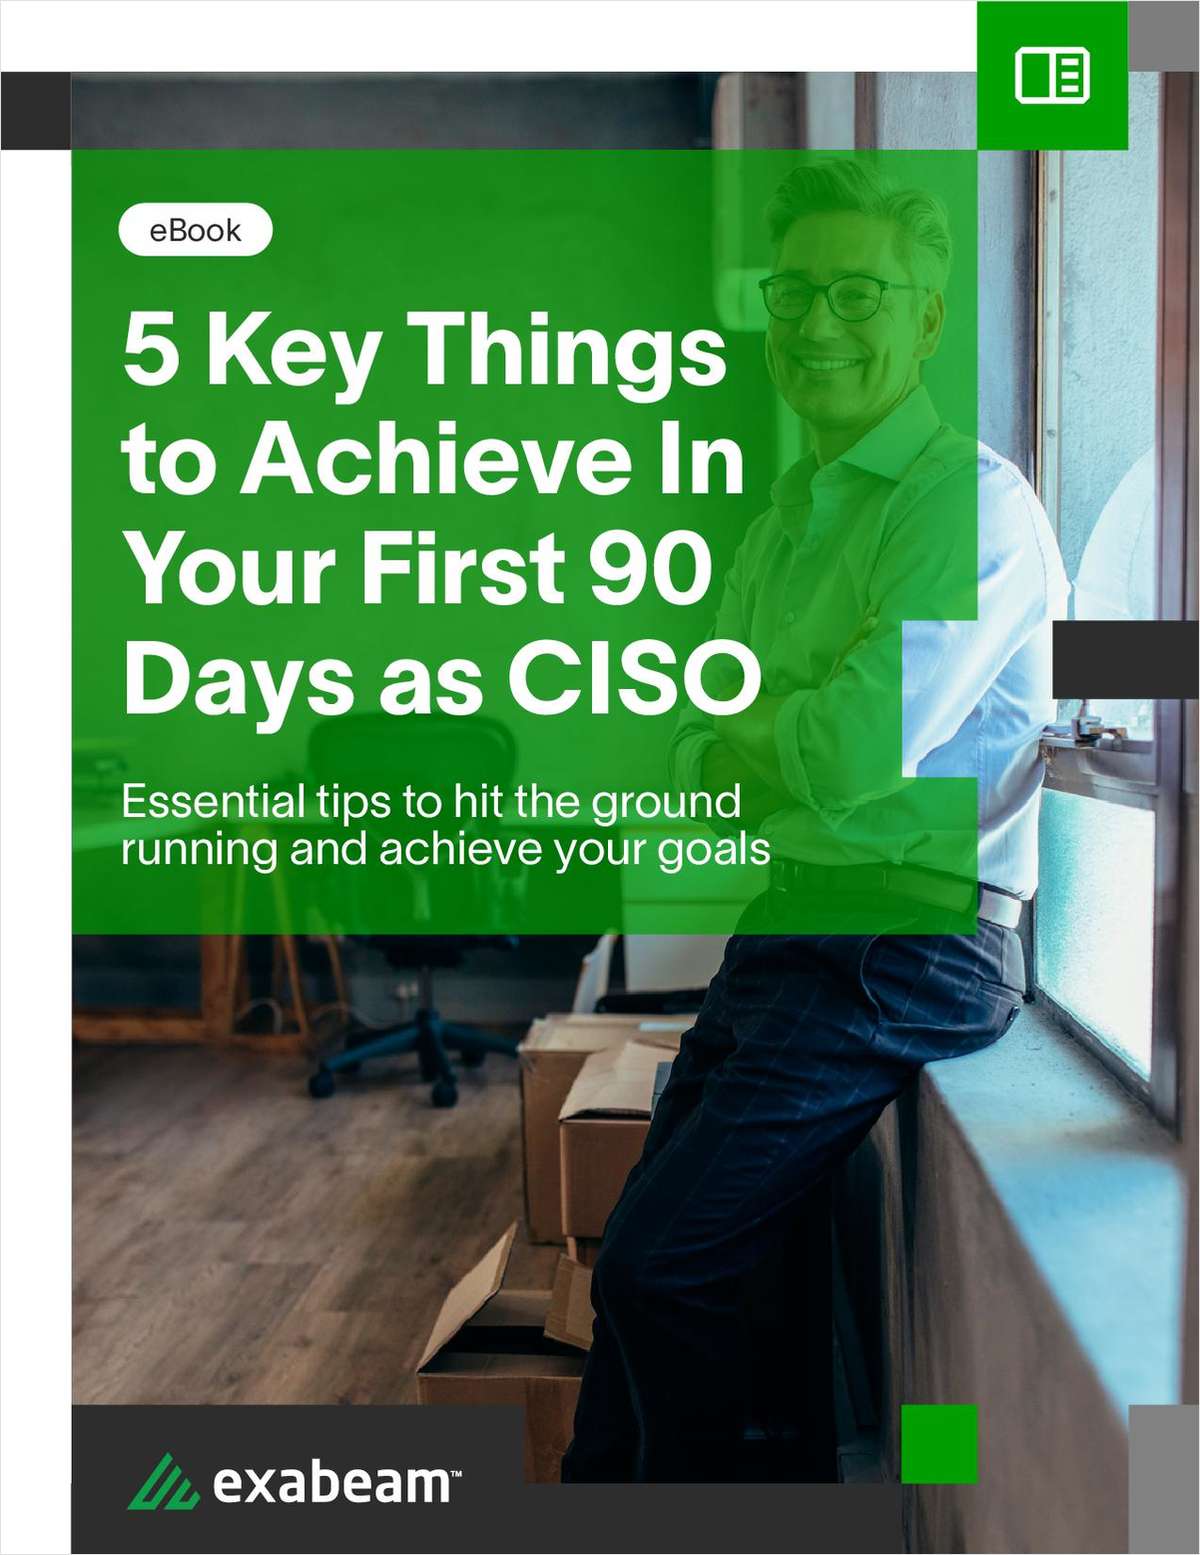 5 Key Things to Achieve In Your First 90 Days as CISO